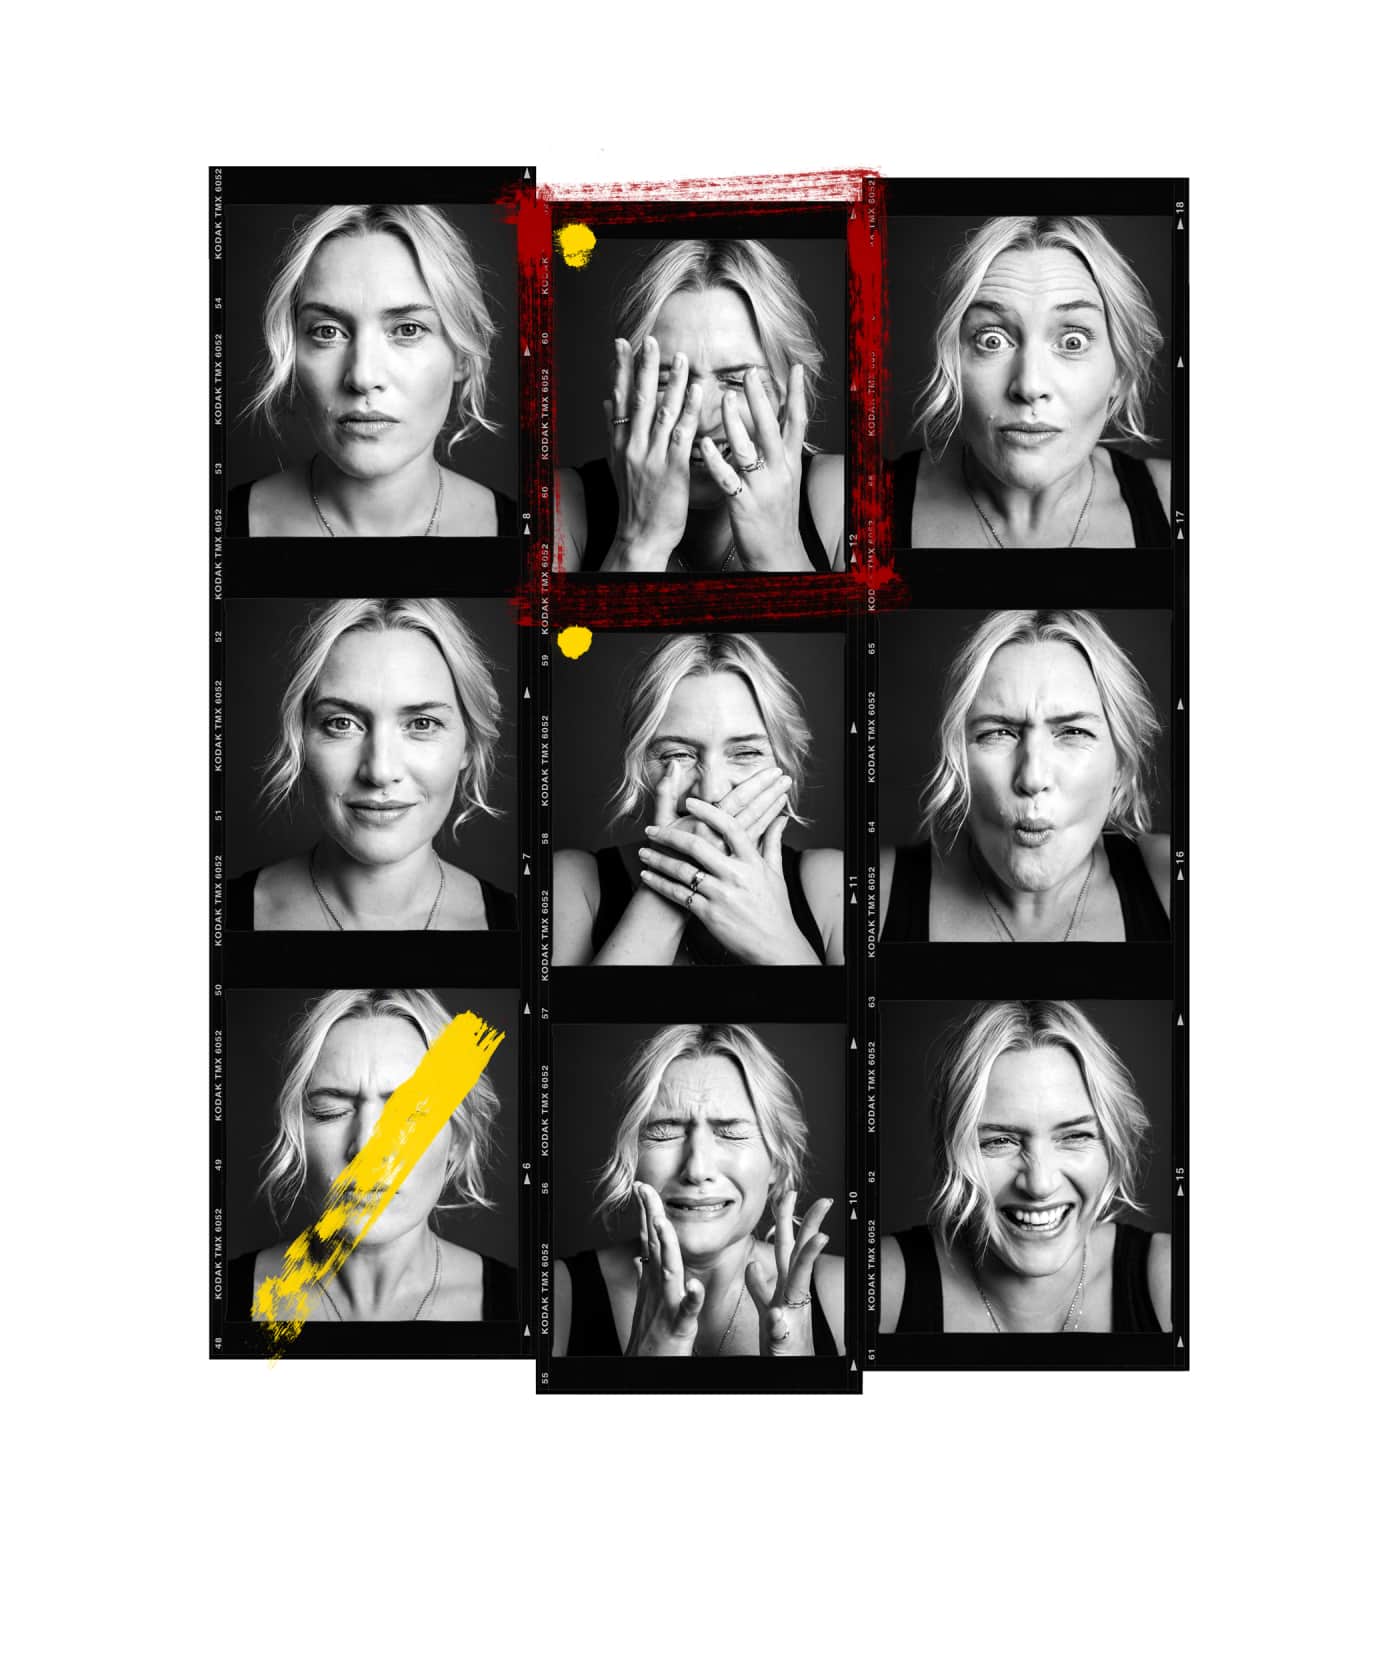 Andy Gotts Kate Winslet Contact Sheet - co-signed Fine Art Giclée Archival Print